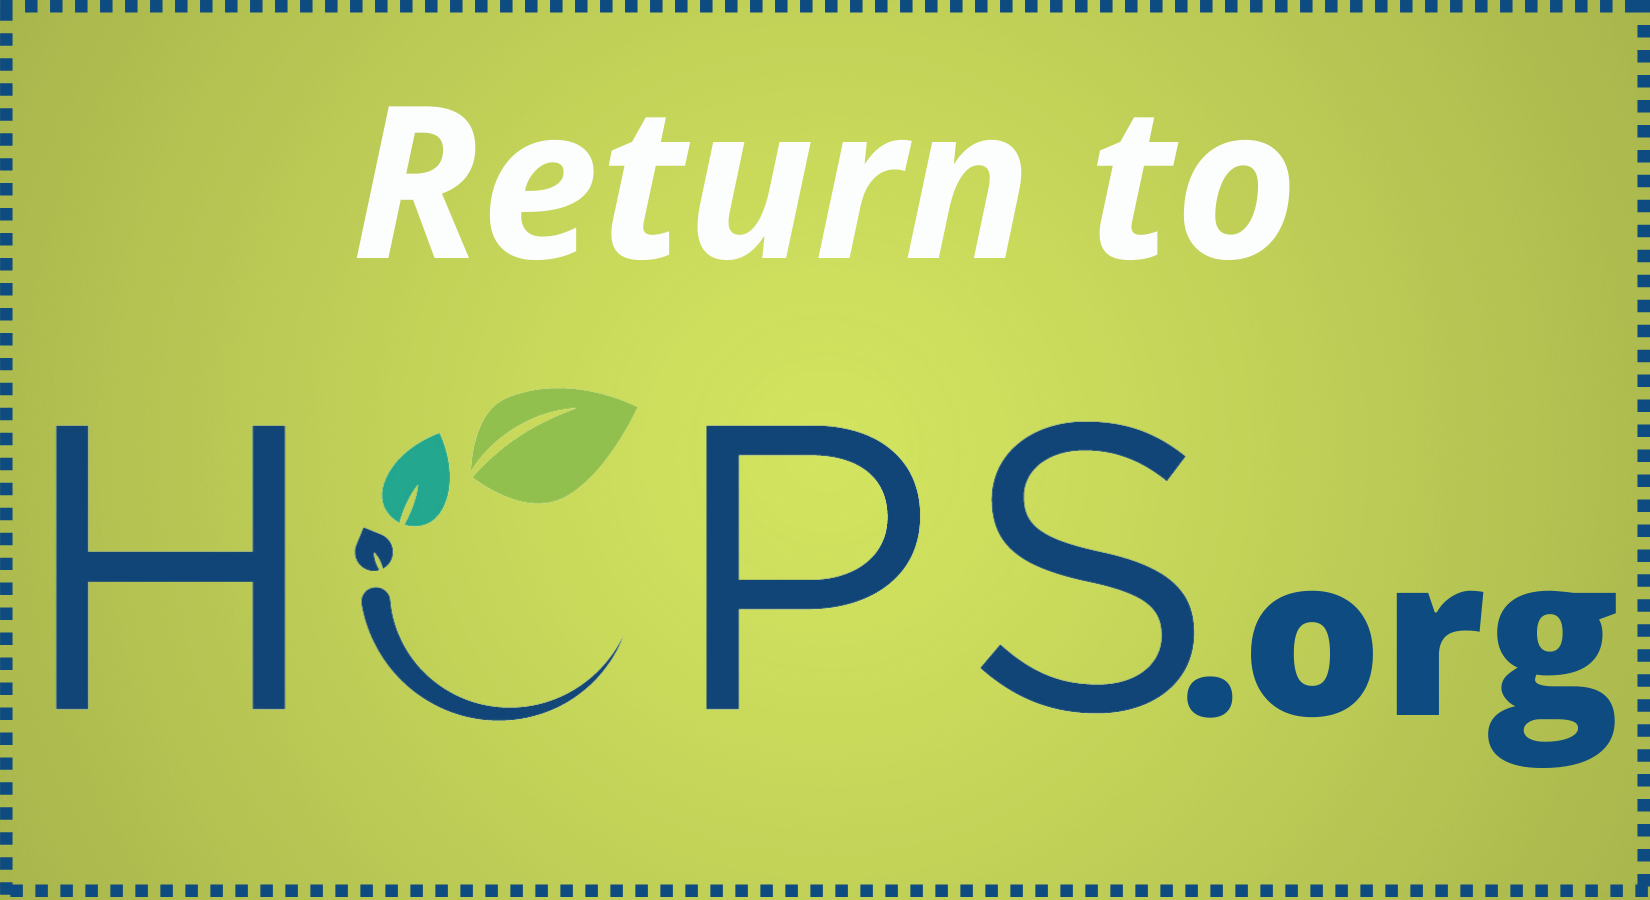 Click to return to HCPS dot org website